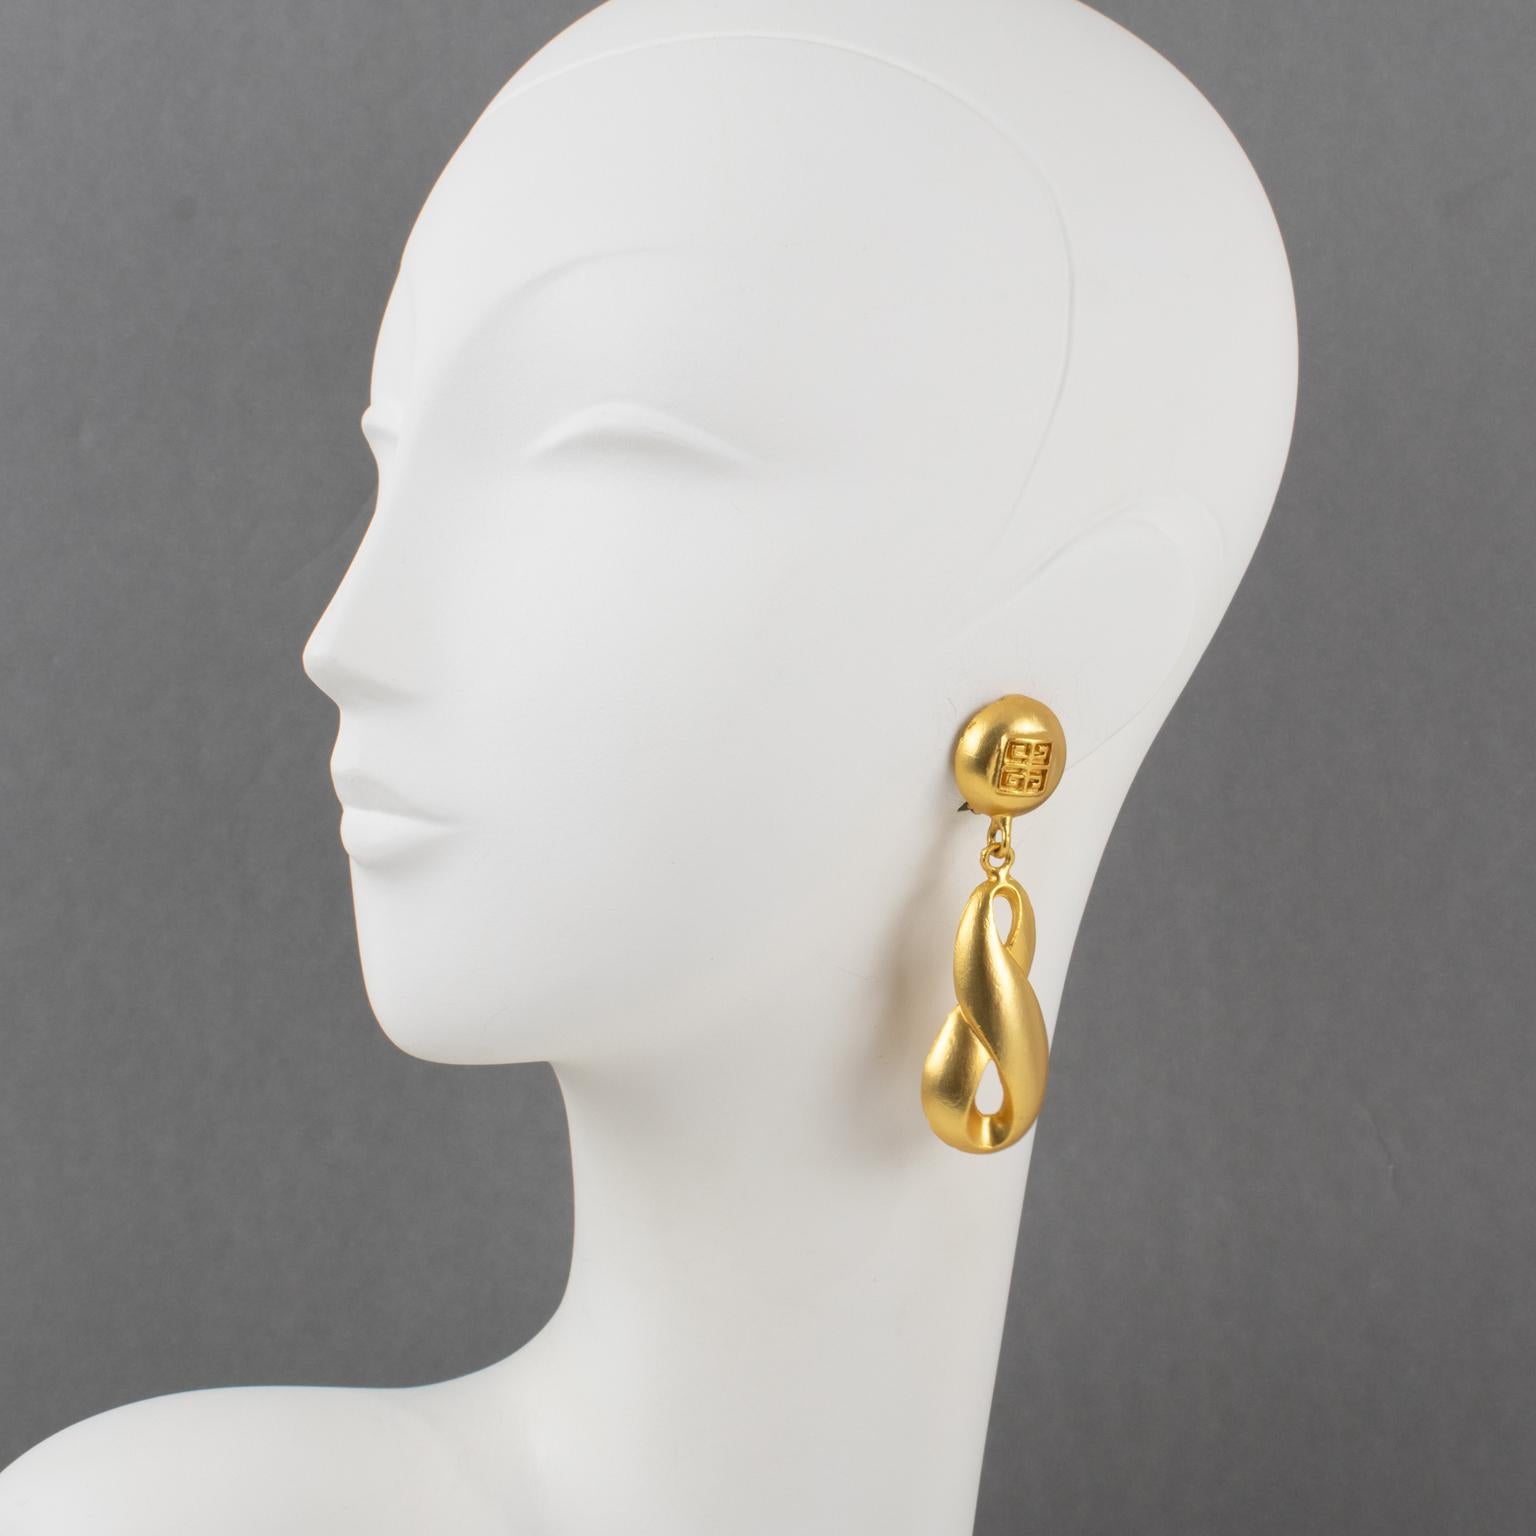 These trendy, stylish Givenchy clip-on earrings feature a long dimensional dangling shape with gilded metal in a satin finish texture. They are signed on the front with the iconic Givenchy logo.
Measurements: 0.94 in wide (2.3 cm) x 3.19 in high (8